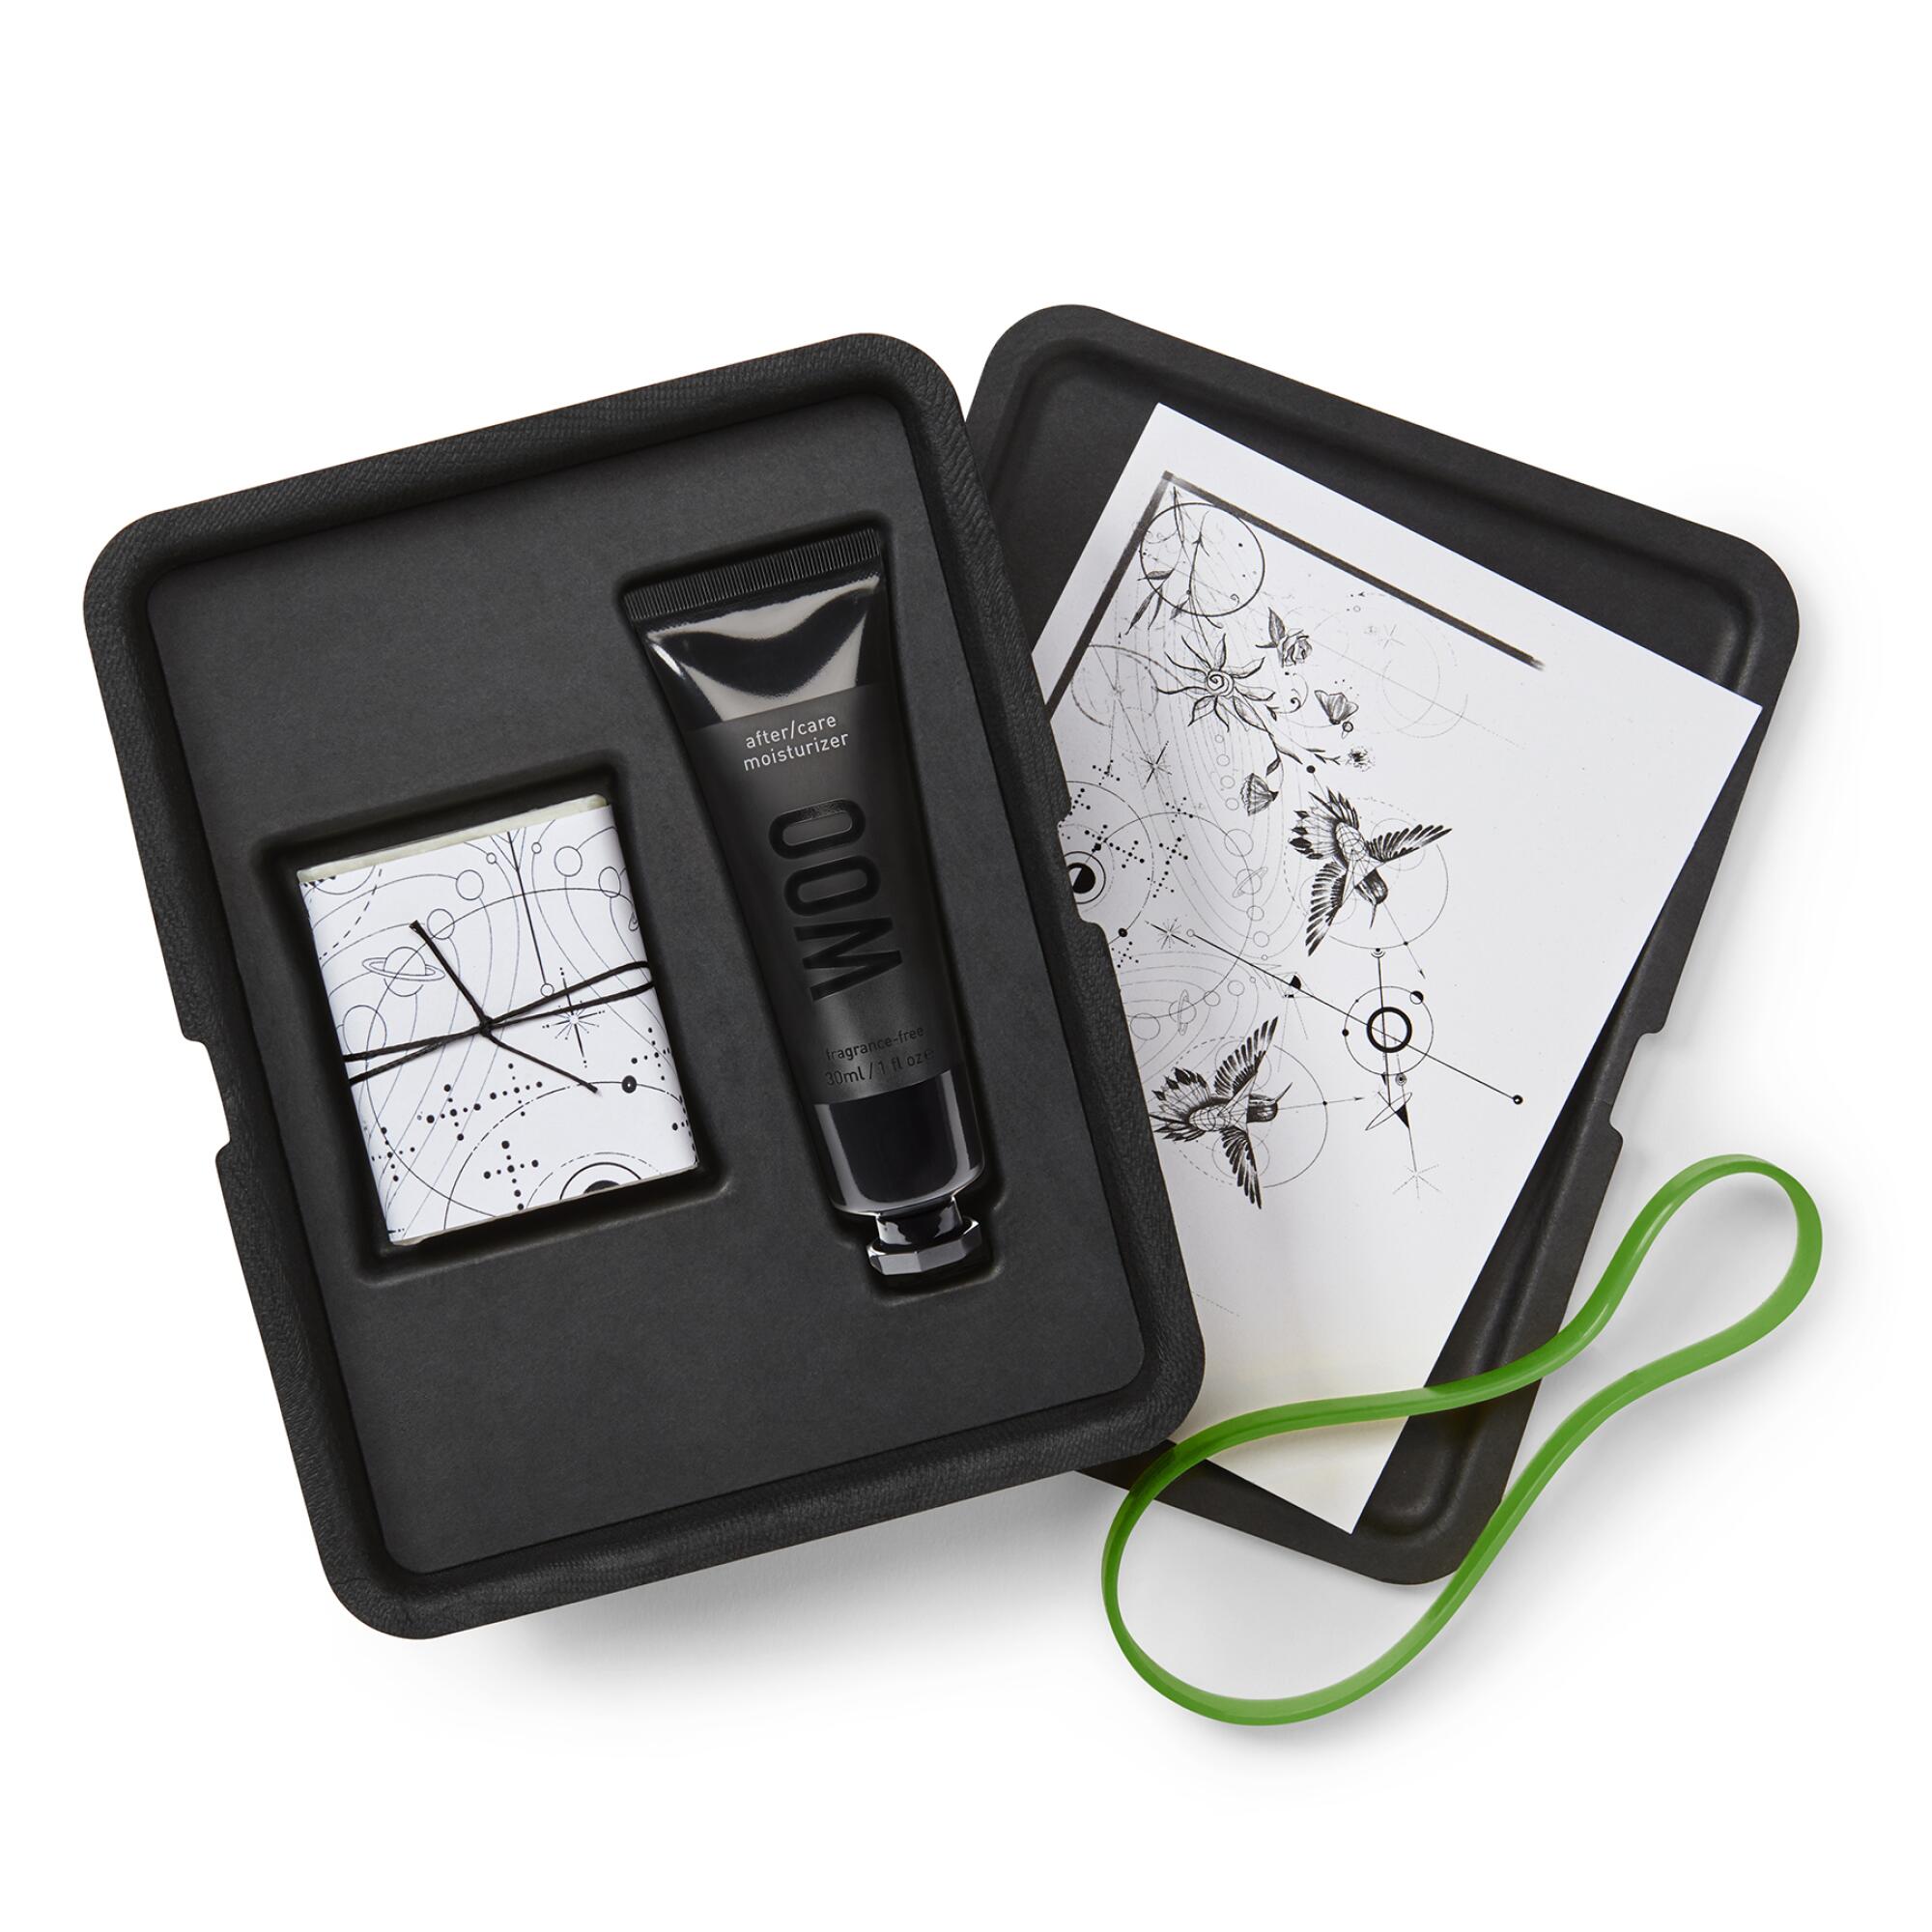 The Woo Skin Essentials After/Care Treatment Kit, $42.